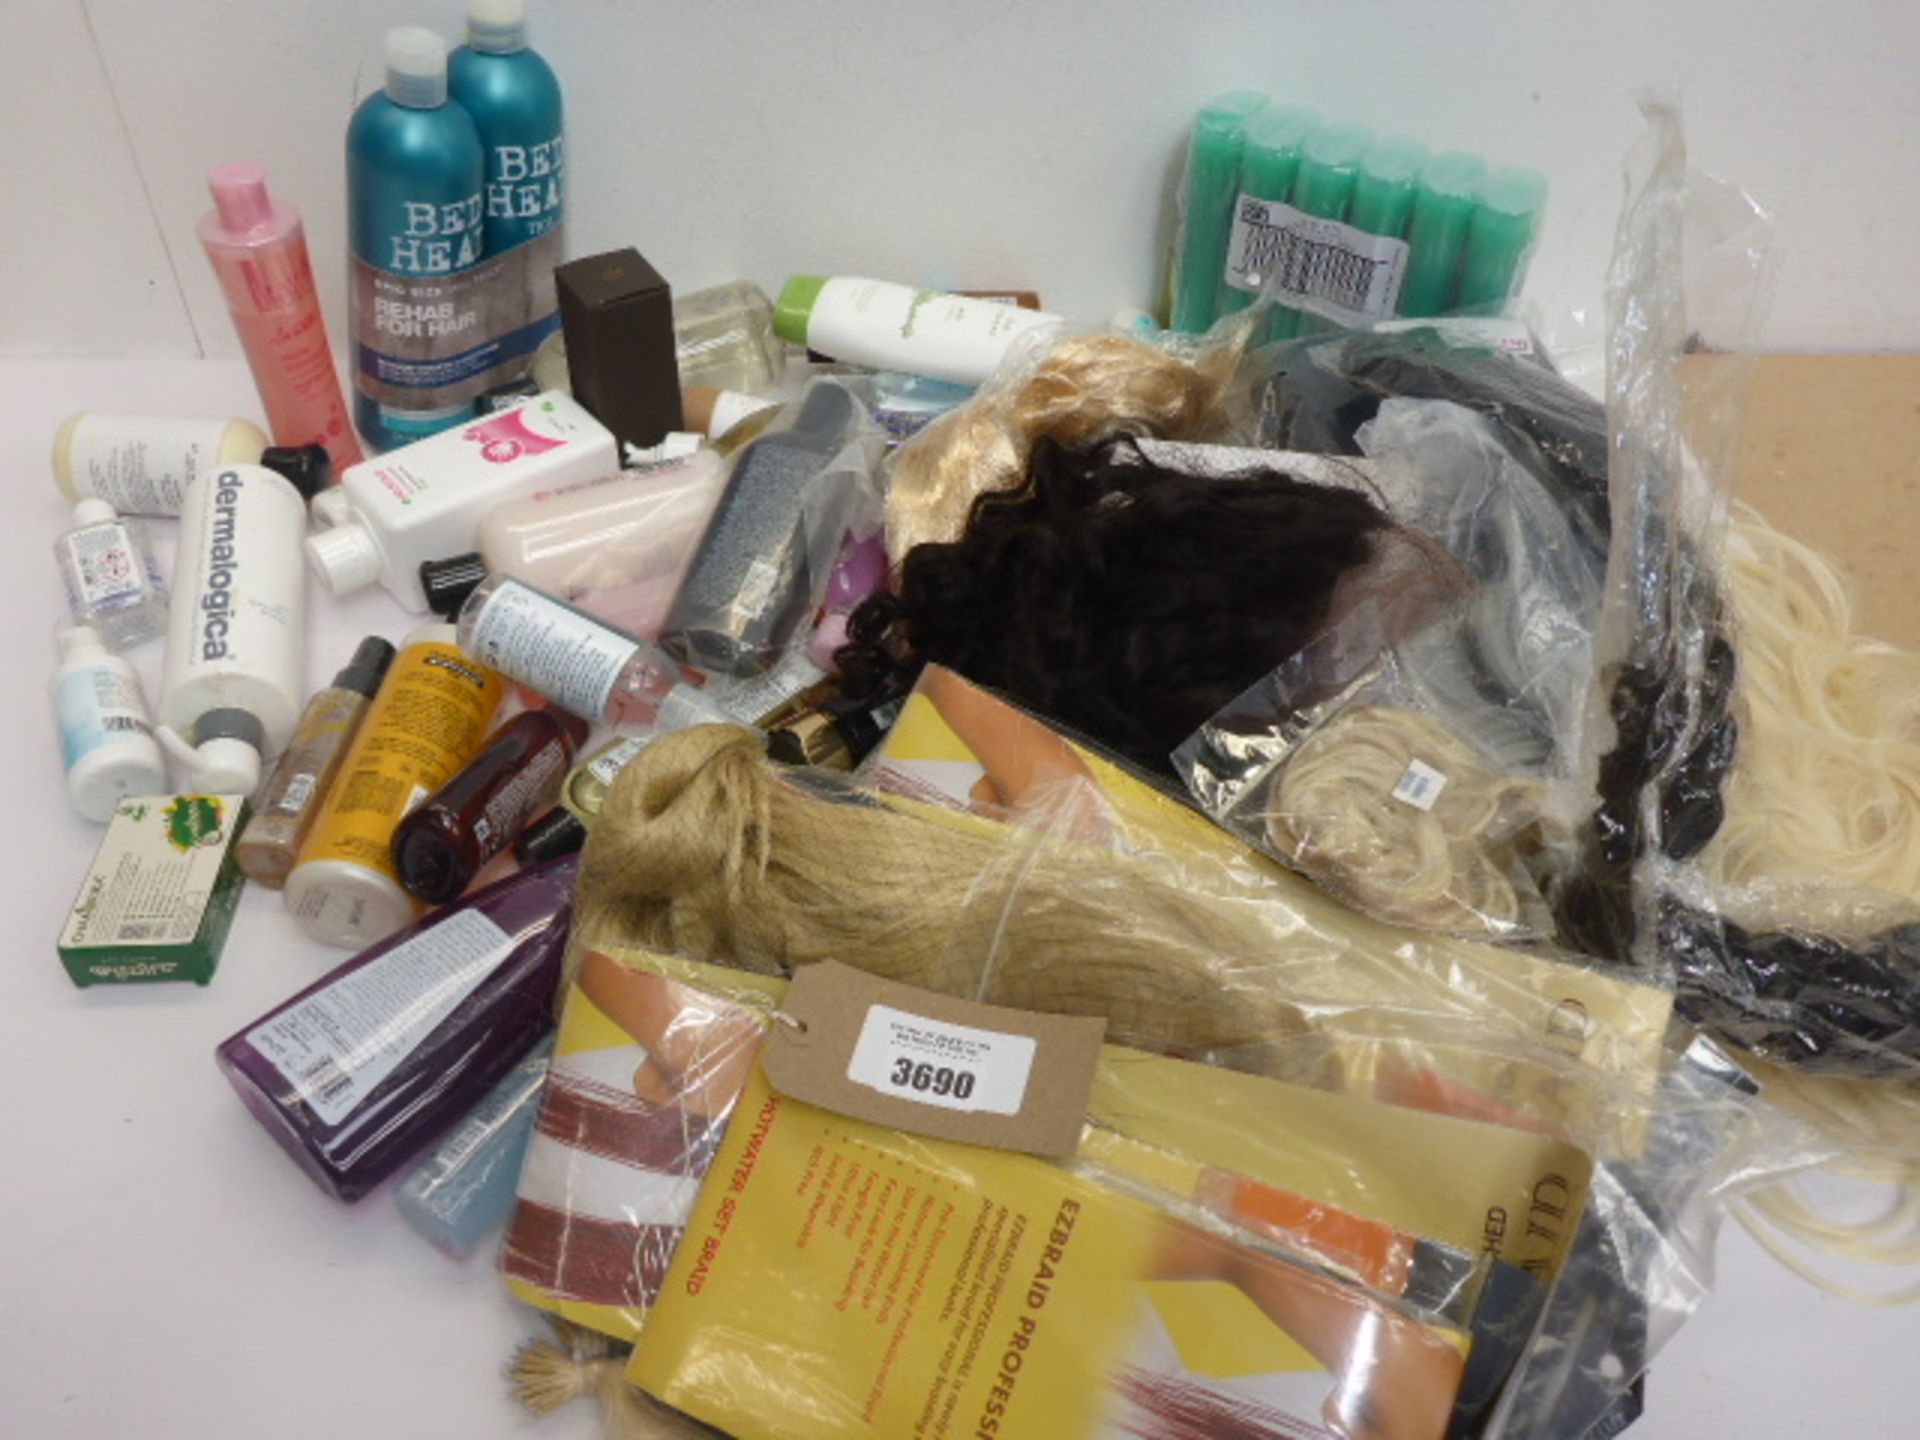 Bag containing wigs, hair pieces, shampoo, conditioner, body wash and other toiletries